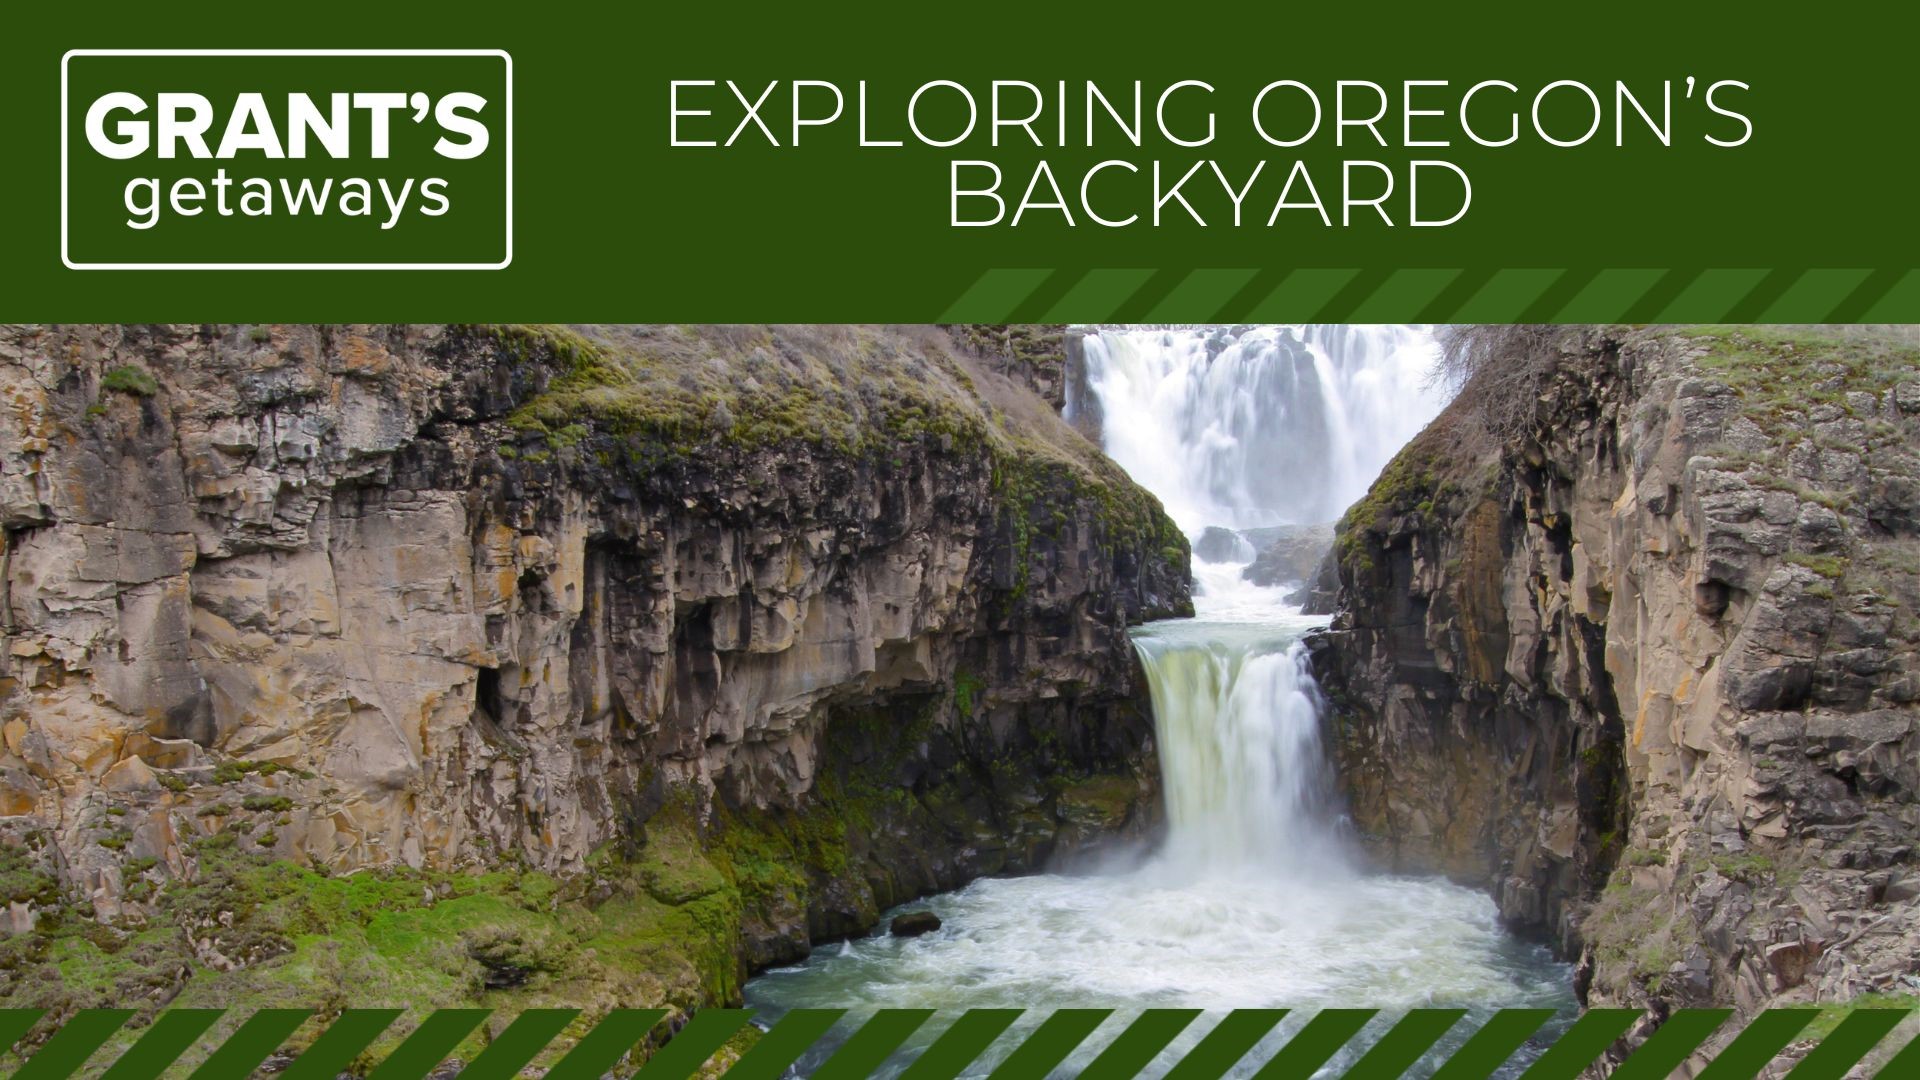 Across North Central Oregon, history reaches back over a century in these backroads byways.